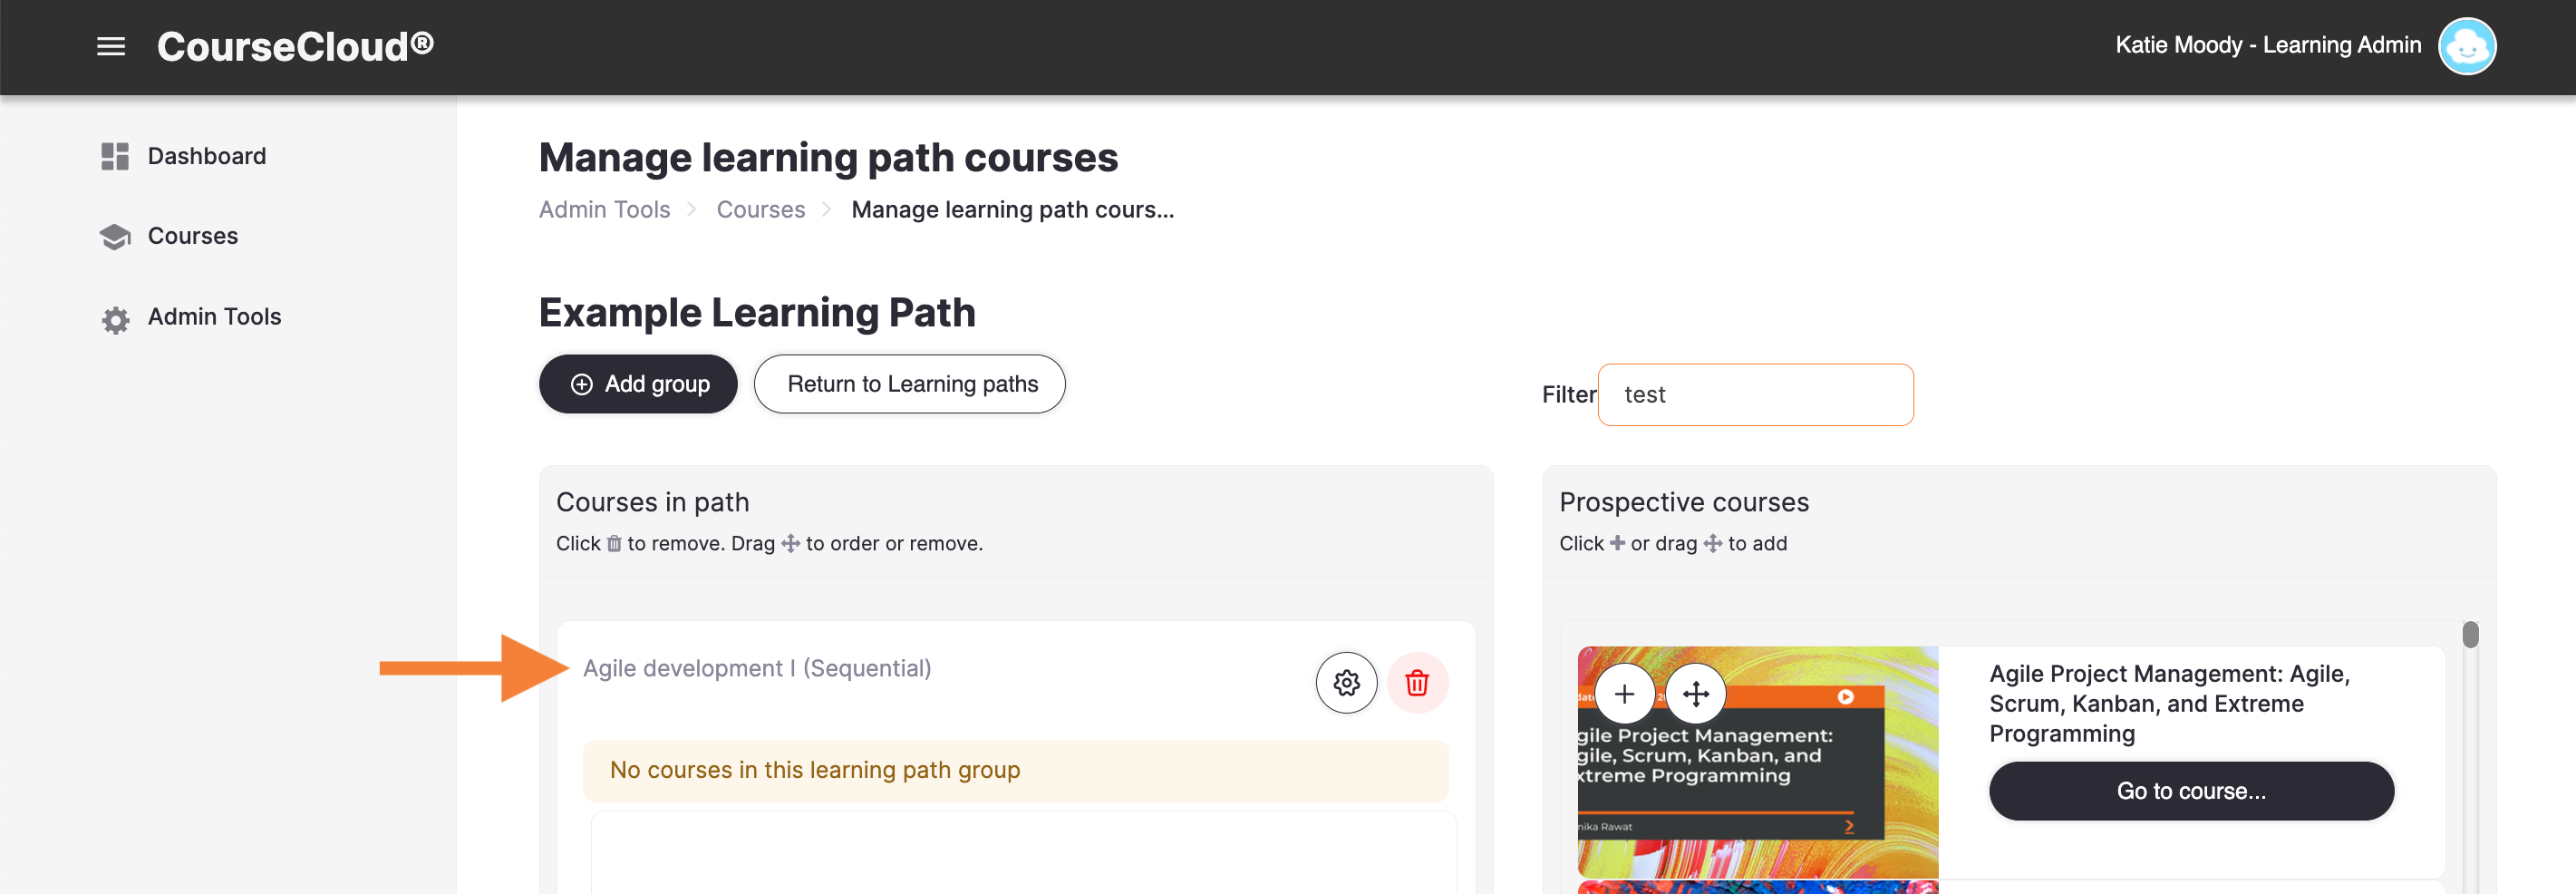 13_-_The_Manage_Learning_Path_Courses_page__with_the_updated_example_group.png